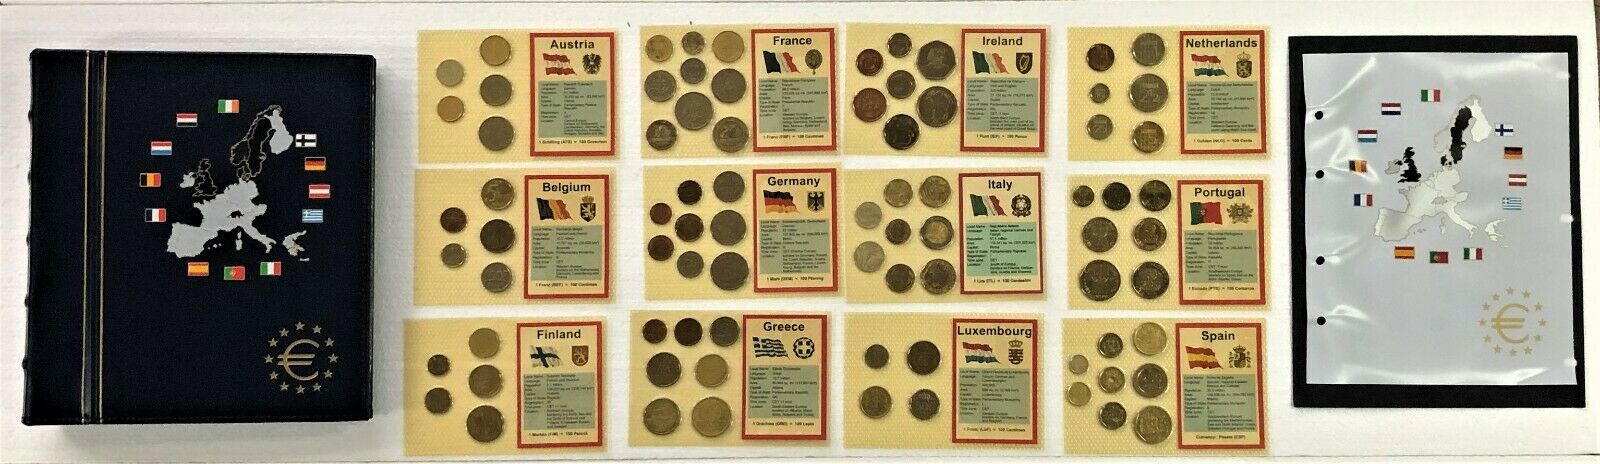 12 NATION PRE  EURO ZONE COIN COLLECTION (TOTAL of 79 COINS) in FANCY ALBUM